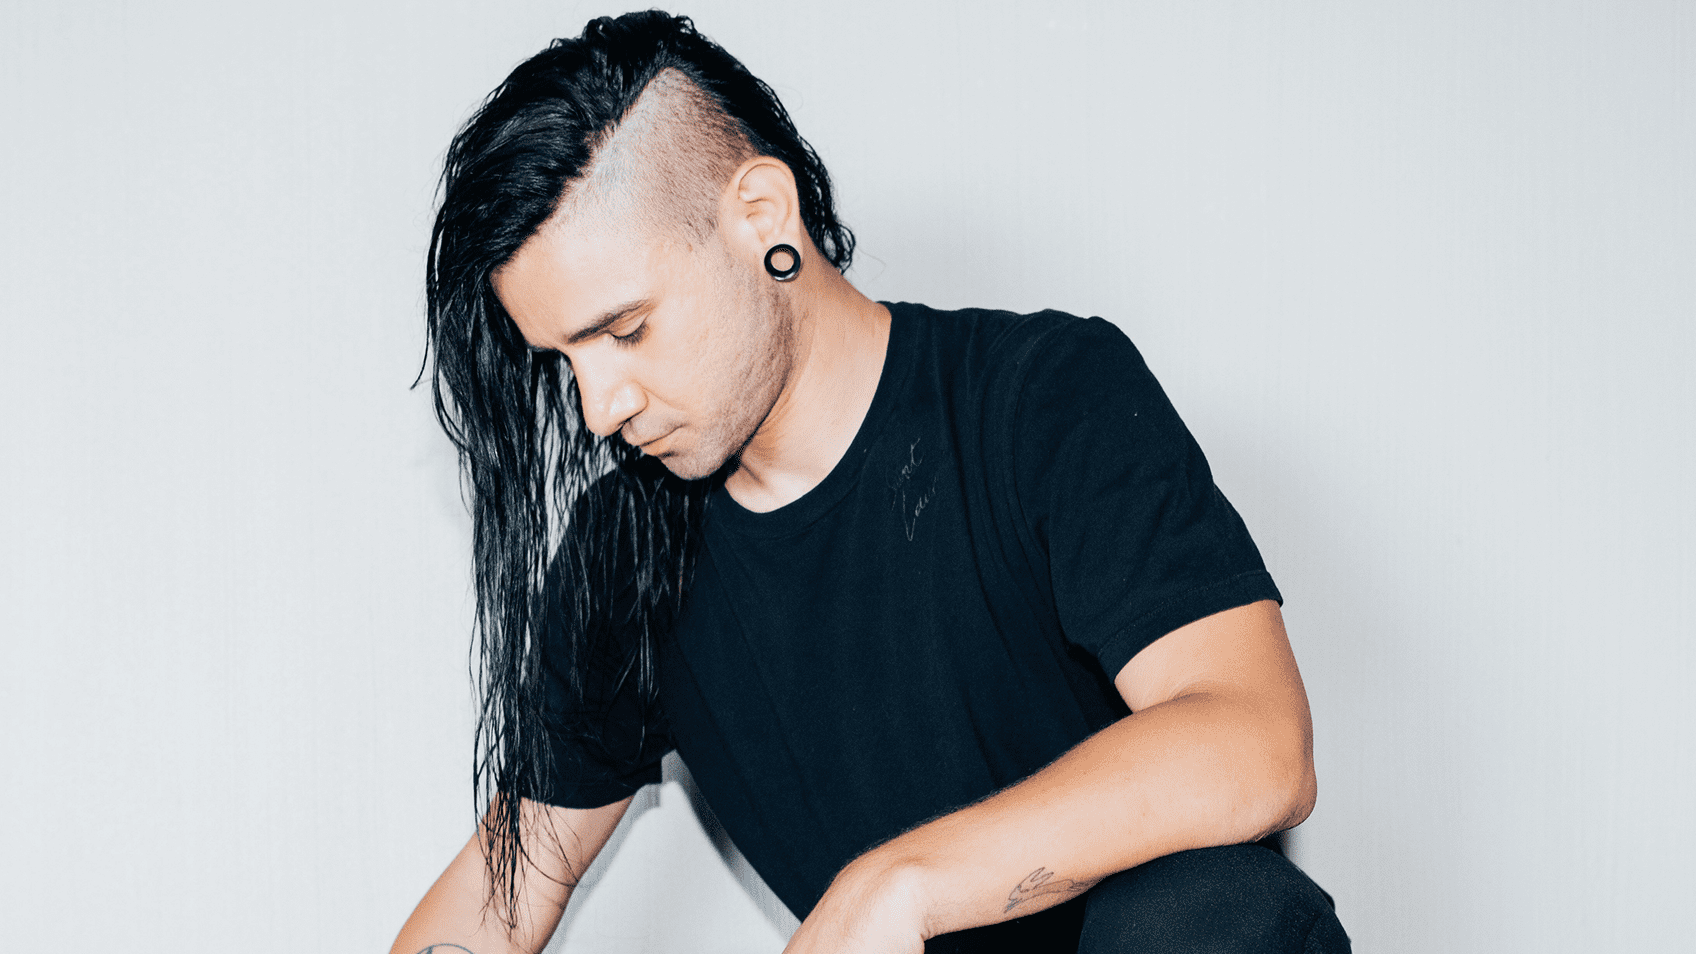 New Music? Skrillex And Chris Lake Pictured In The Studio Together - EDM  Maniac